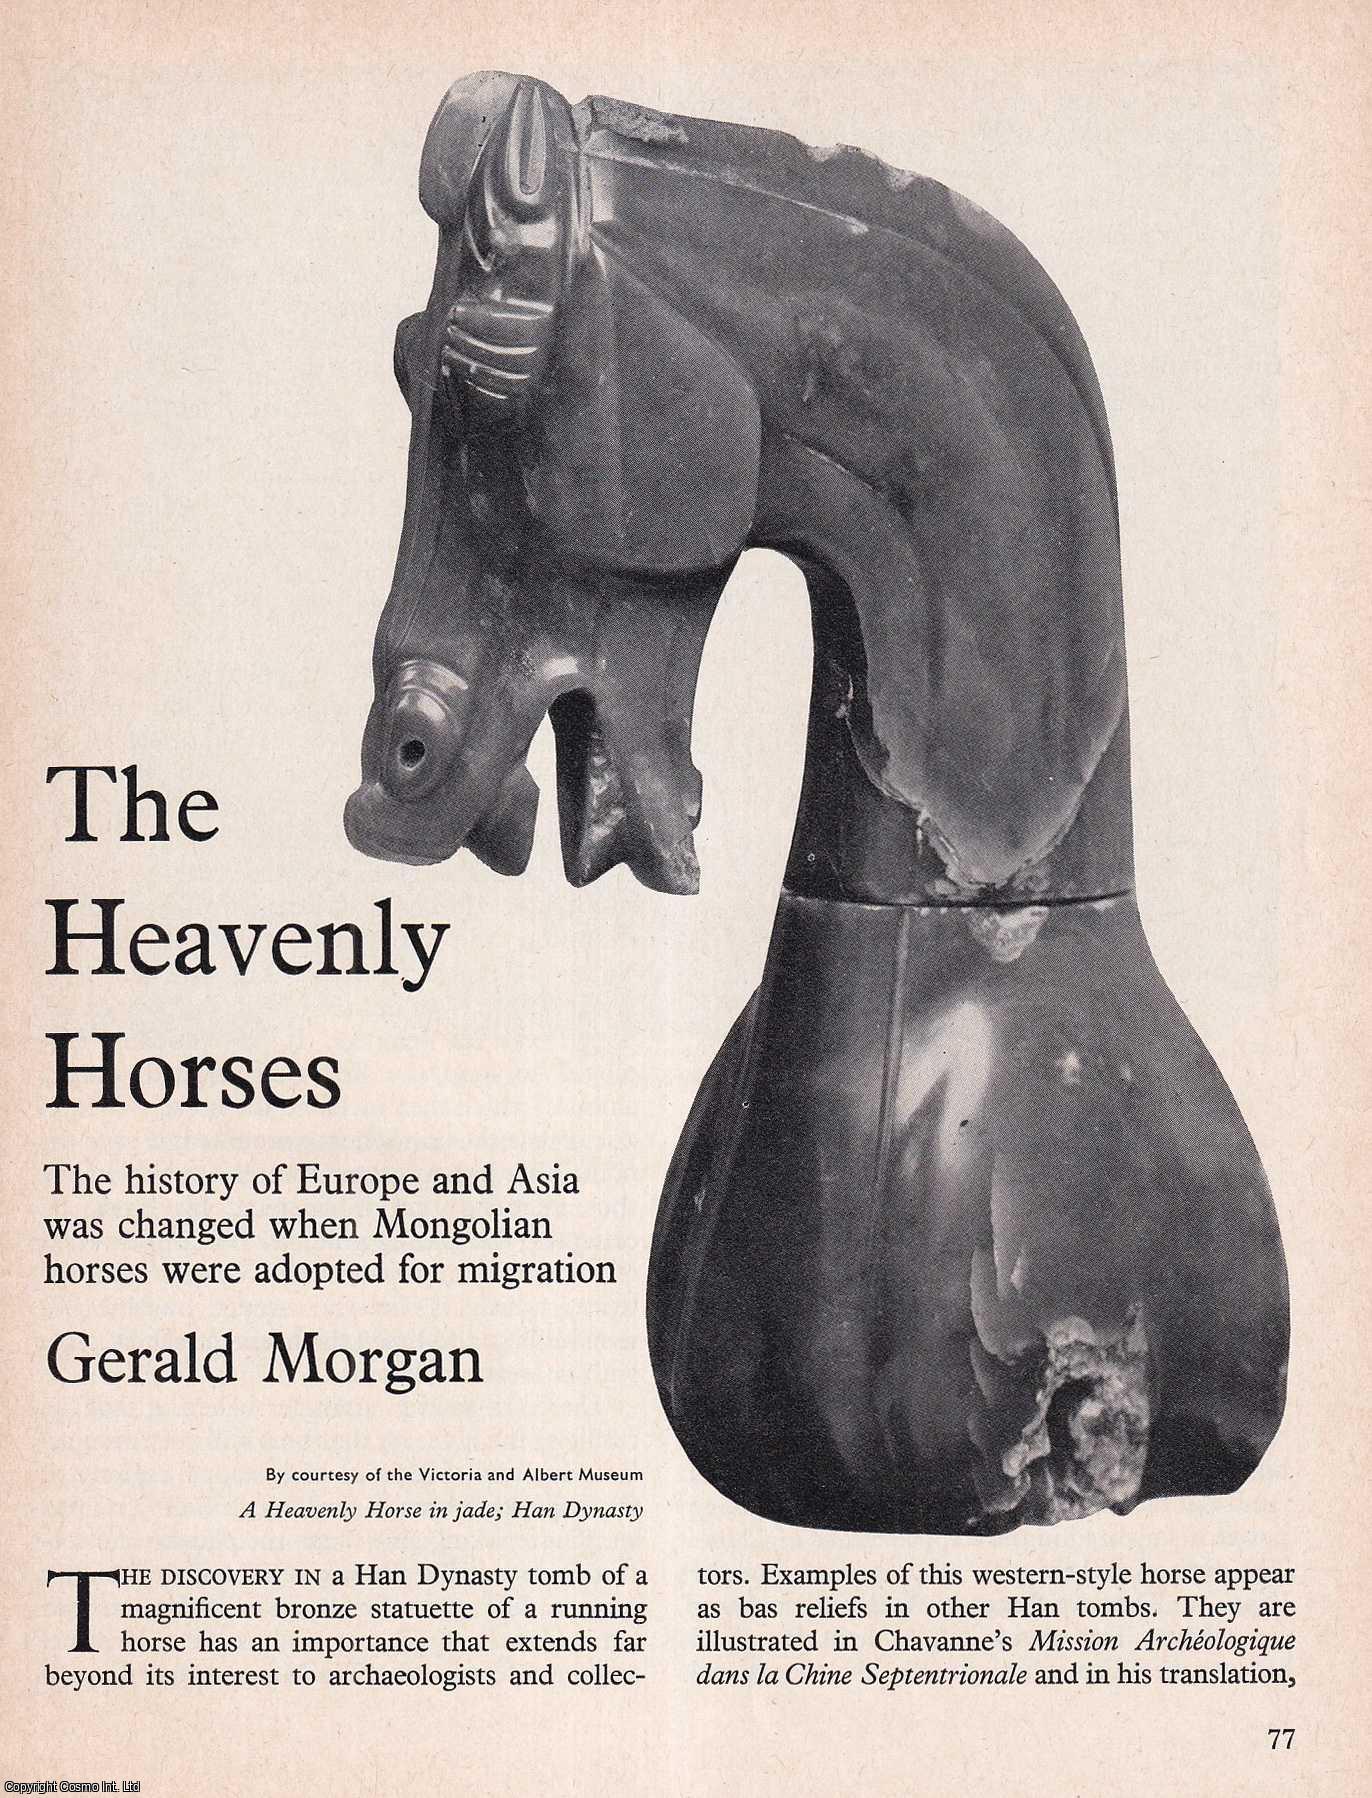 Gerald Morgan - The Heavenly Horses: The History of Europe and Asia. An original article from History Today magazine, 1973.